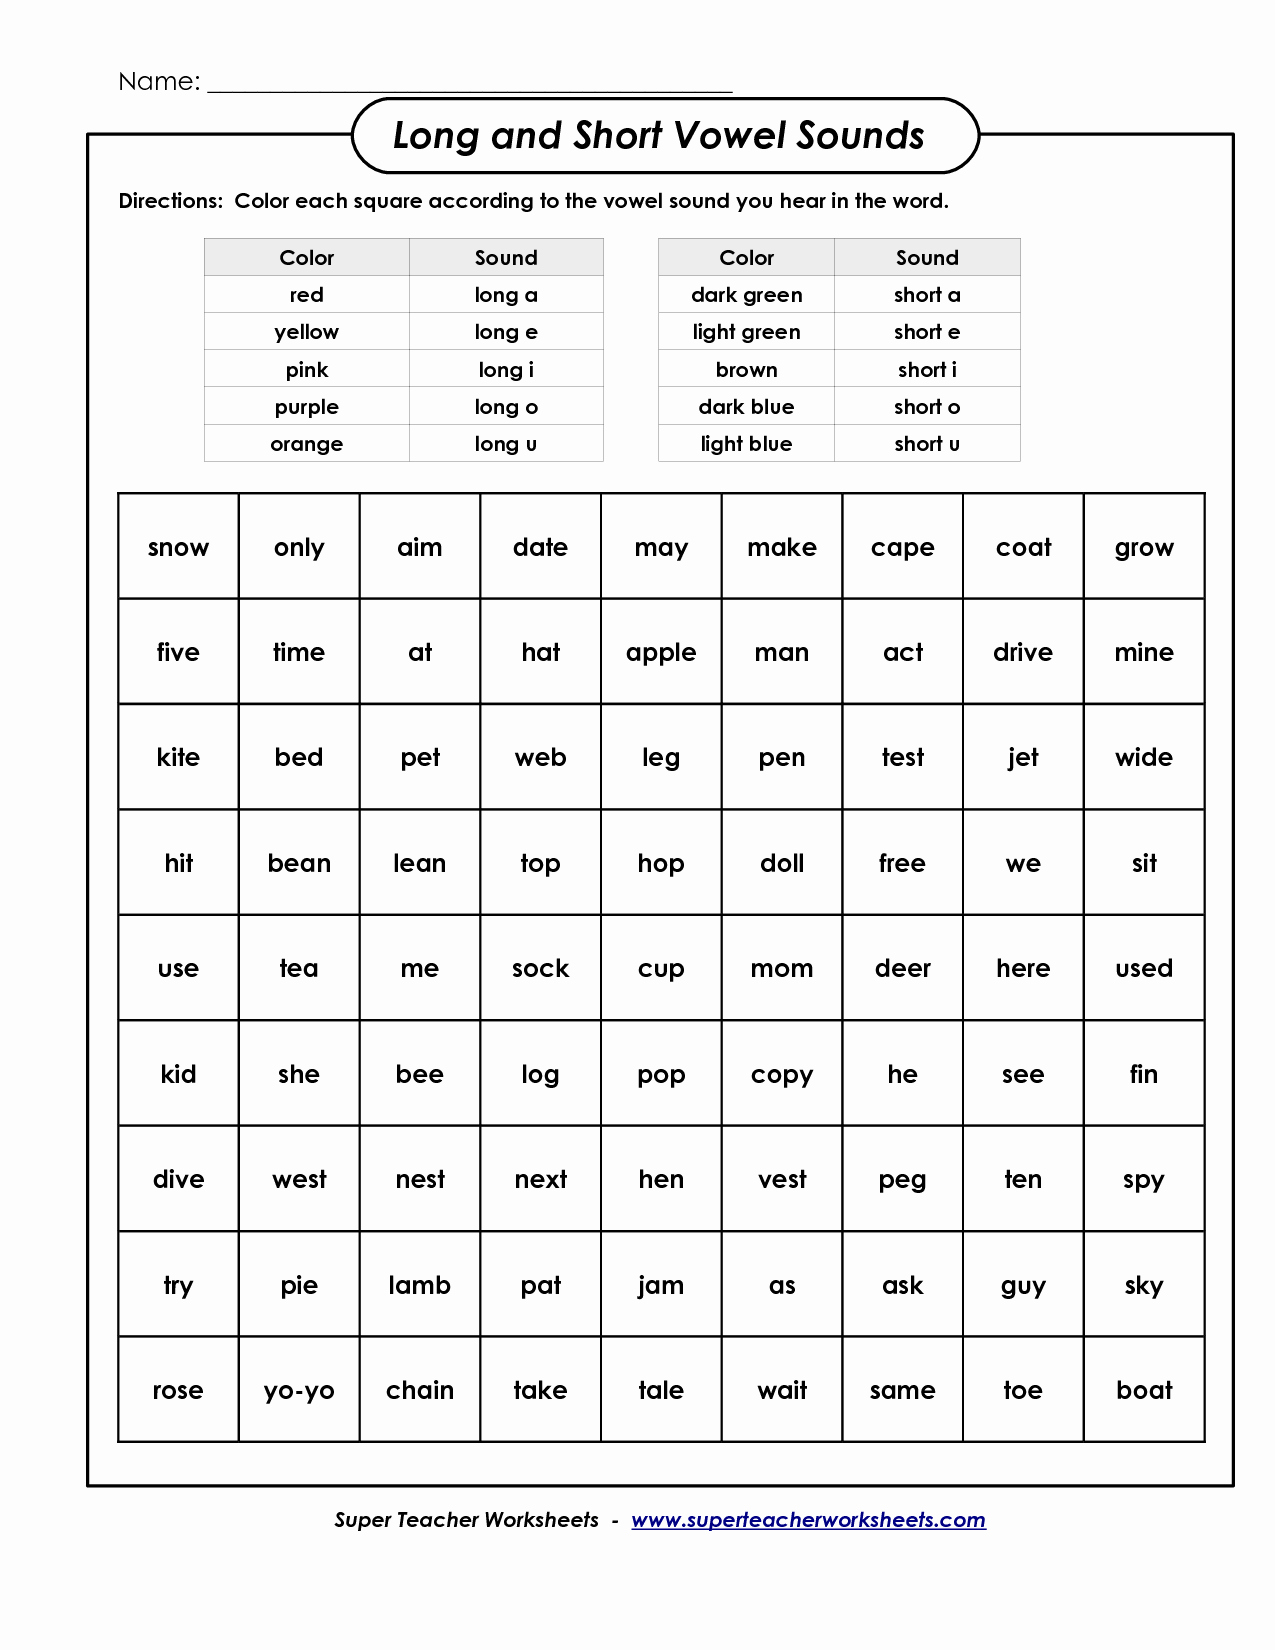 Short and Long Vowels Worksheet Fresh Long and Short Vowel Coloring Worksheet Vowels